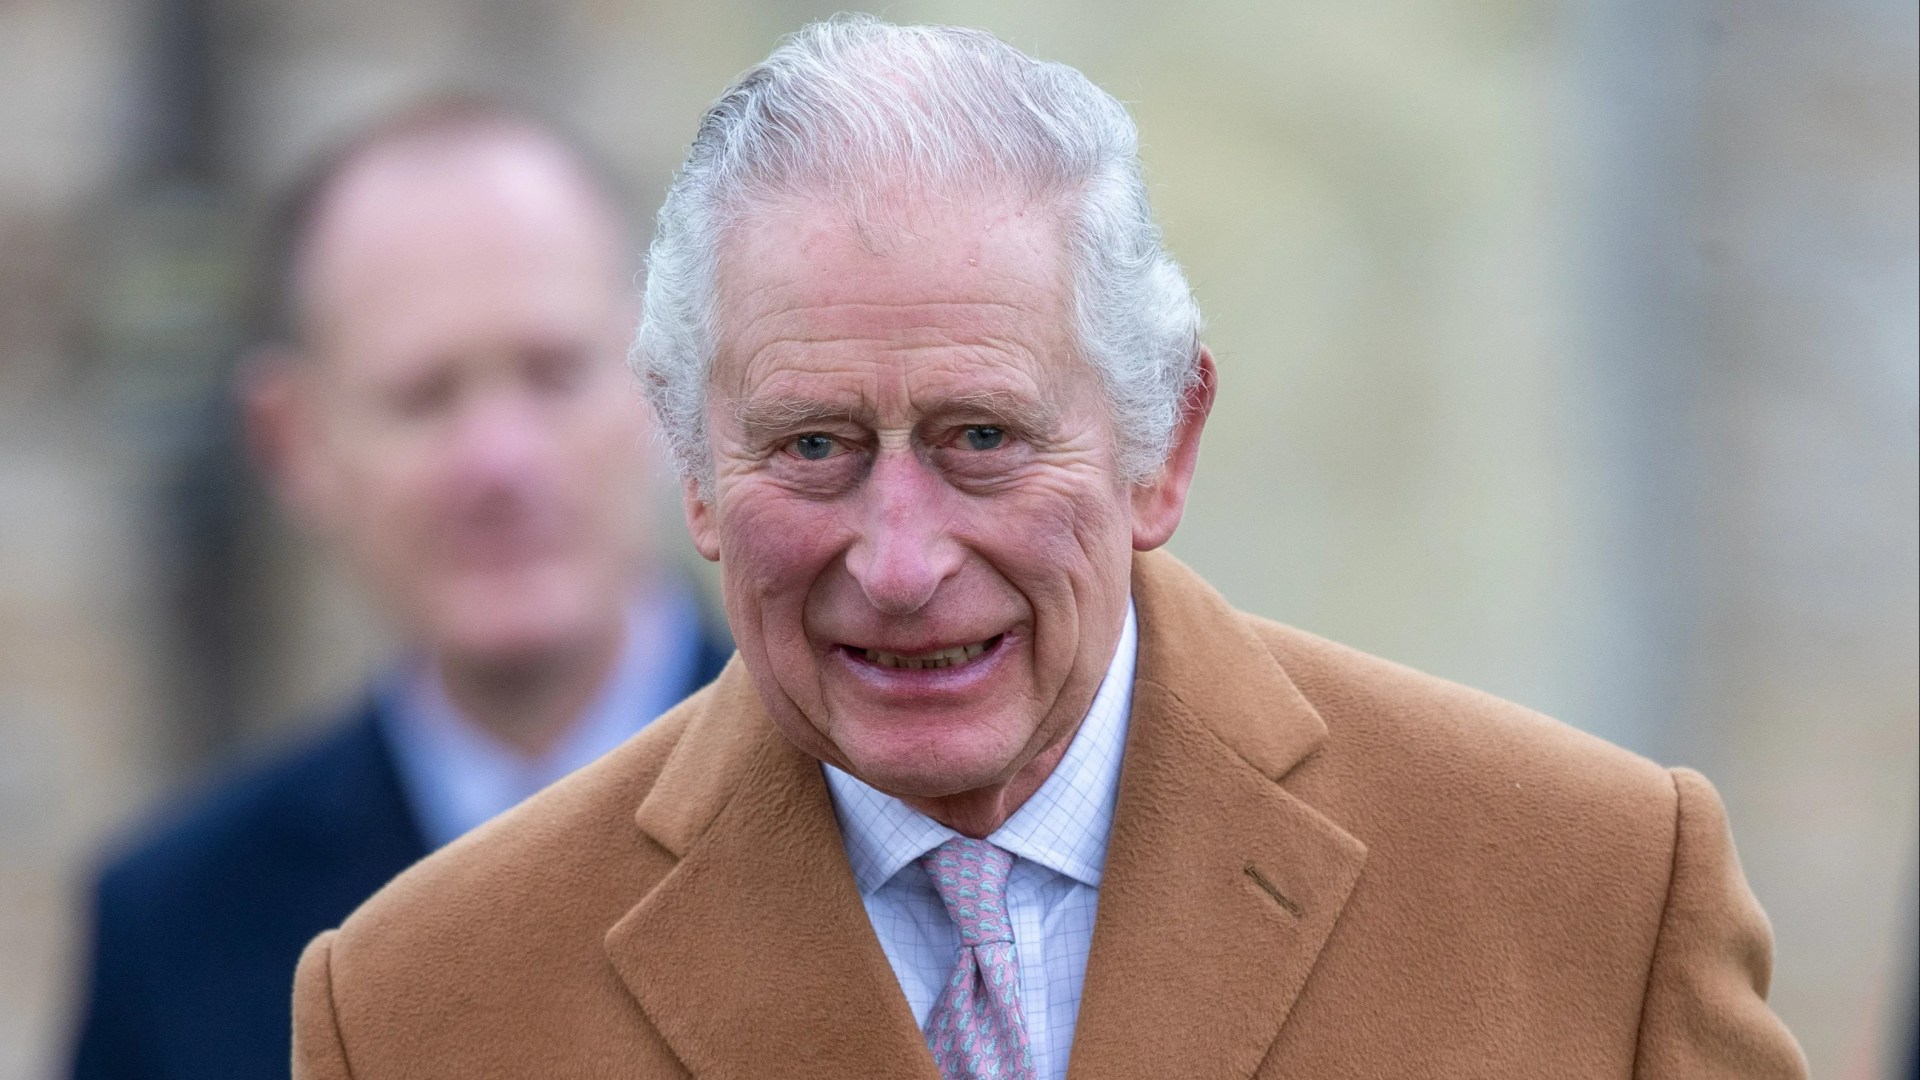 Cops issue warning to King Charles over his massive new solar farm with 2,000 panels on his Sandringham estate [Video]